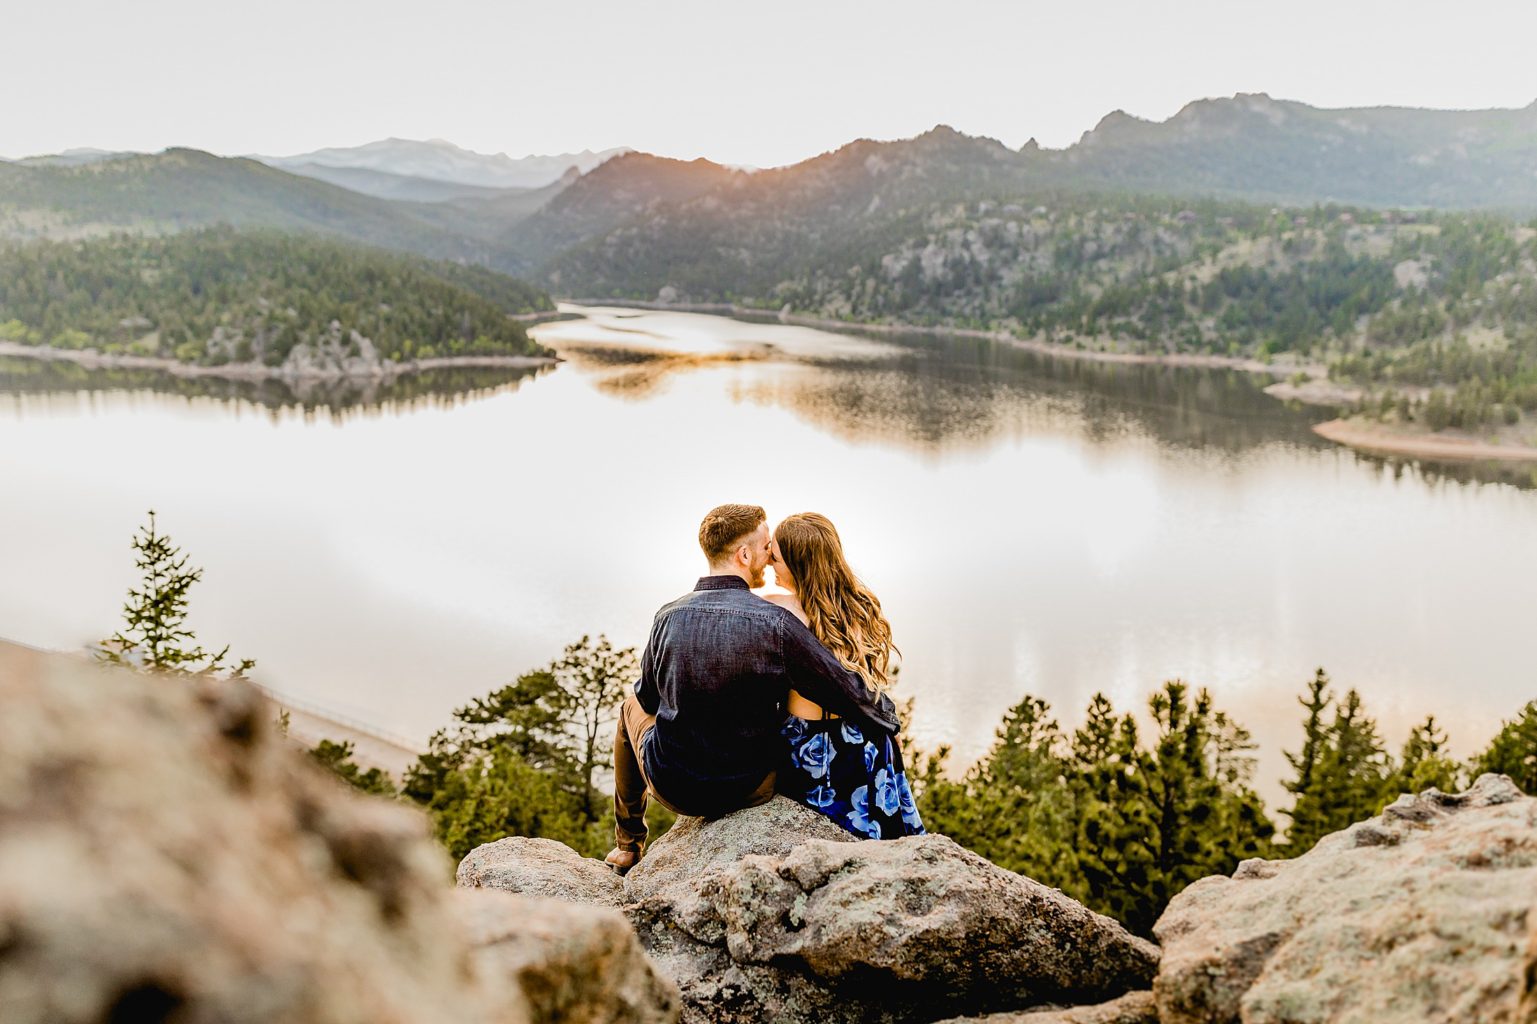 couple sits together overlooking incredible rocky mountain scenery and lake to celebrate anniversary